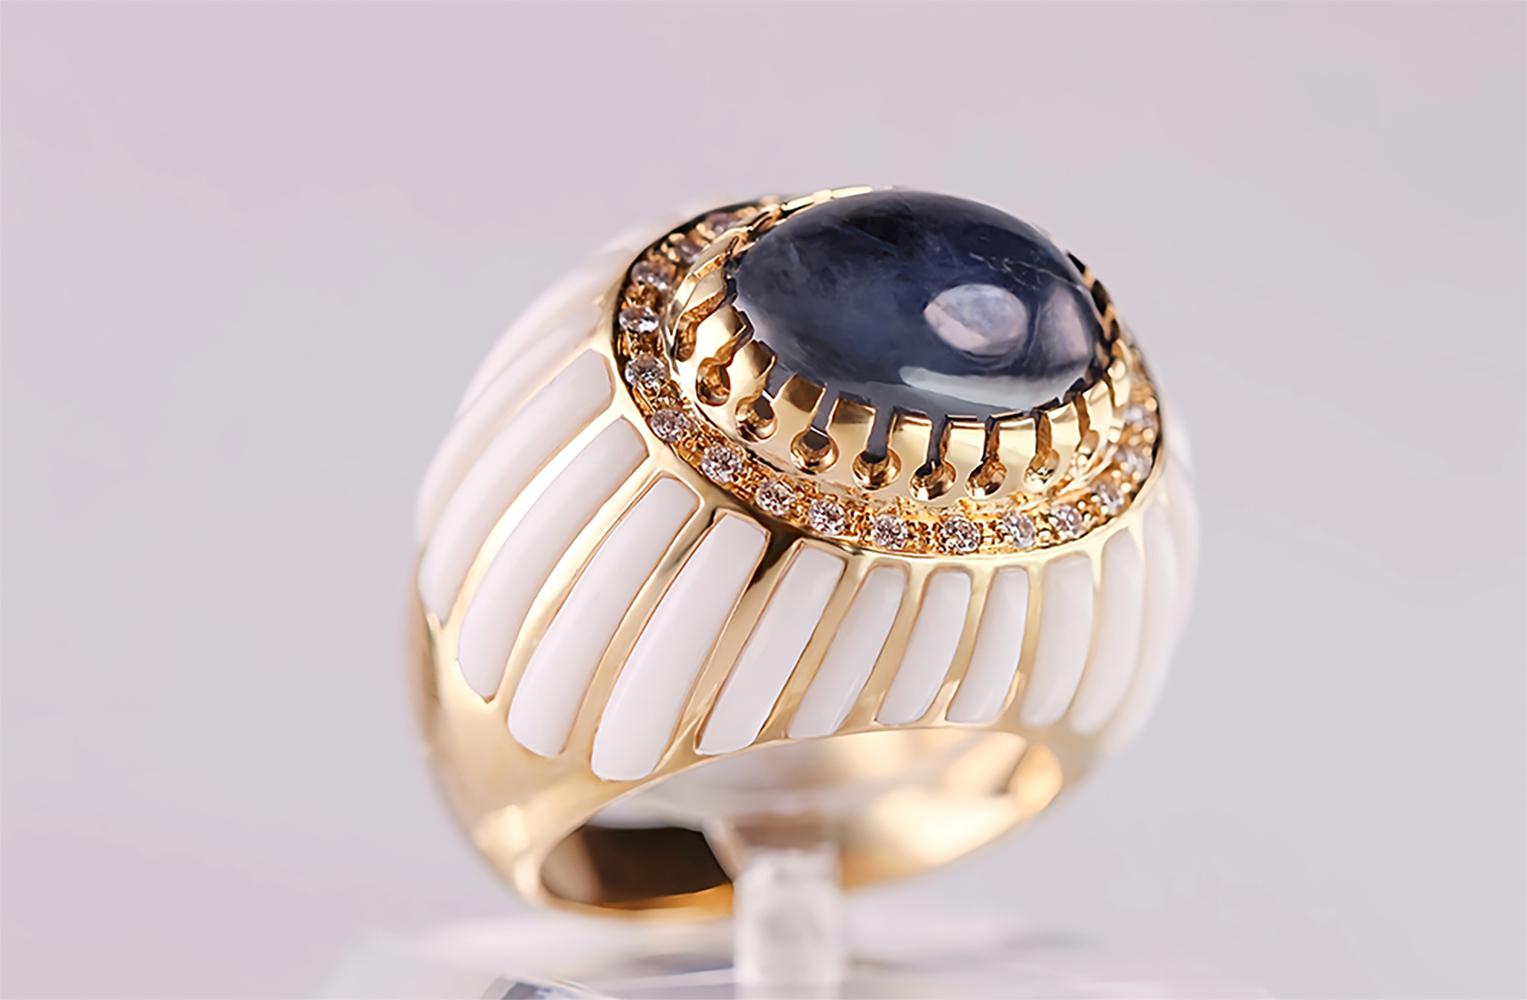 Women's or Men's Classy 18kt Yellow Gold Ring with 12.21 ct Cabochon Sapphire and White Coral For Sale